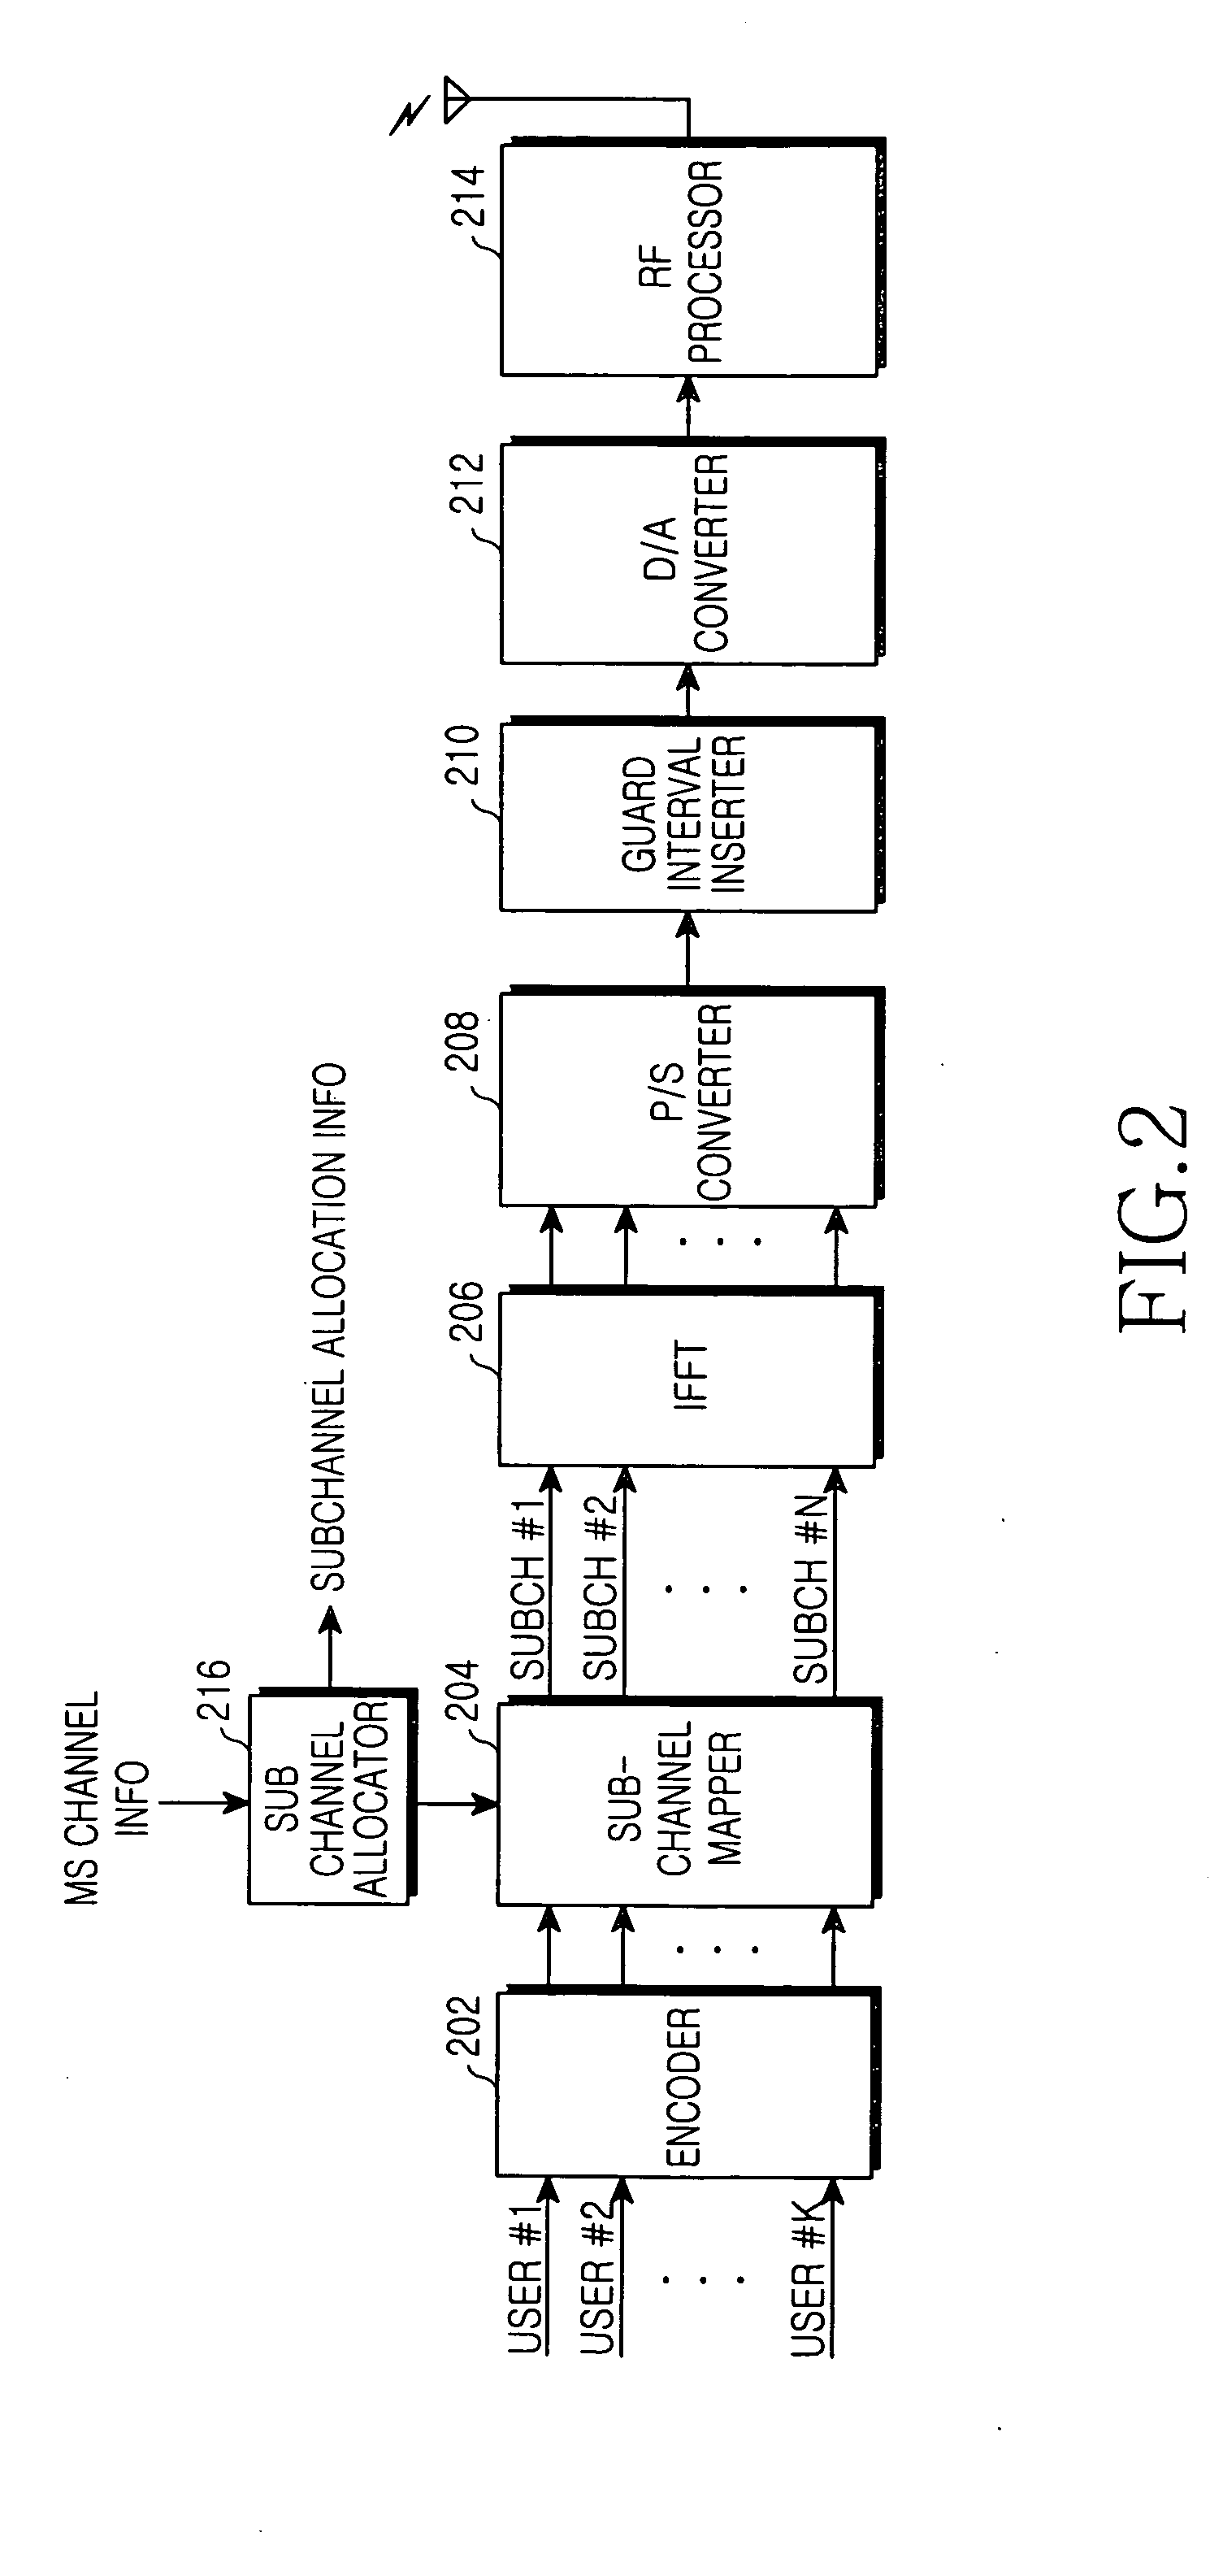 Channel estimation apparatus and method for adaptive channel allocation in an orthogonal frequency division multiple access system